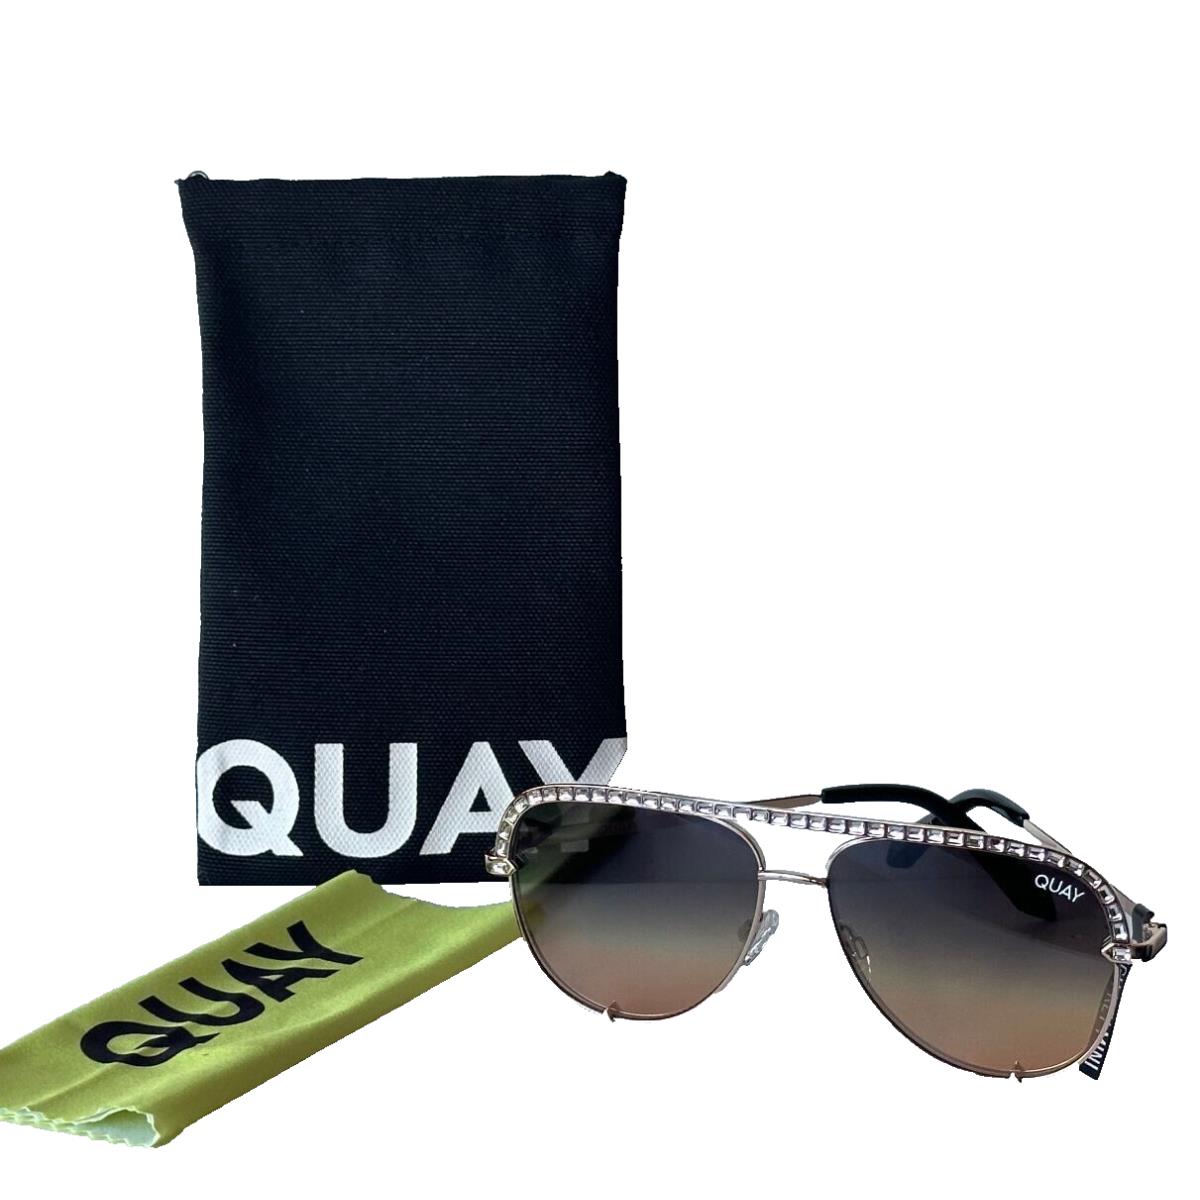 Quay High Key Mini Bling Jewel Embellished Sunglasses with Soft Case - Frame: Gold, Lens: Brown